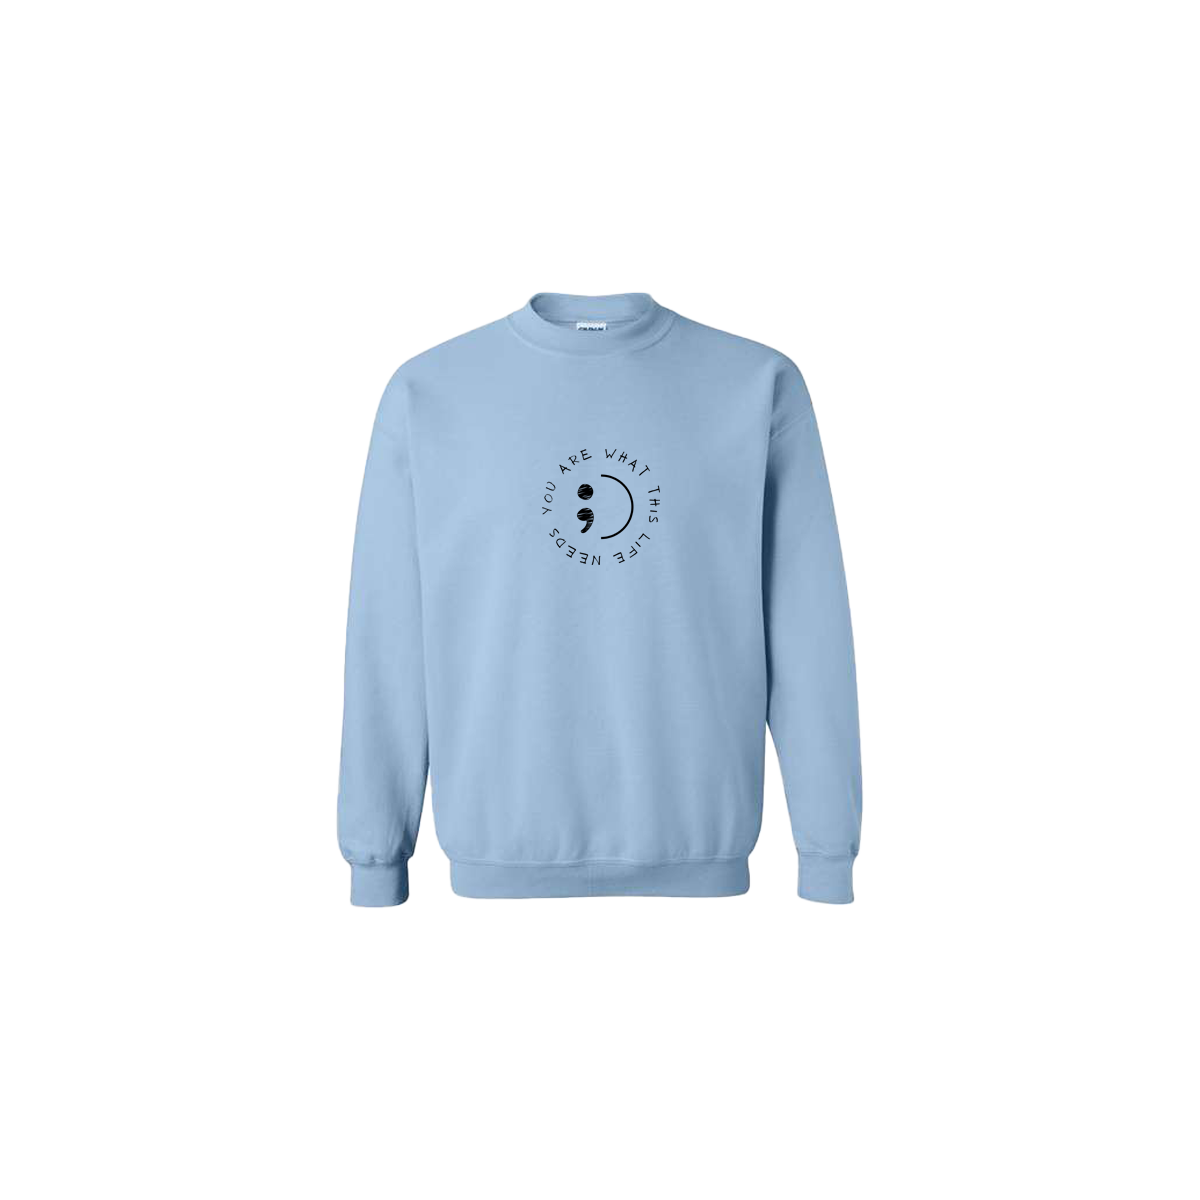 You Are What This Life Needs Embroidered Light Blue Crewneck - Mental Health Awareness Clothing